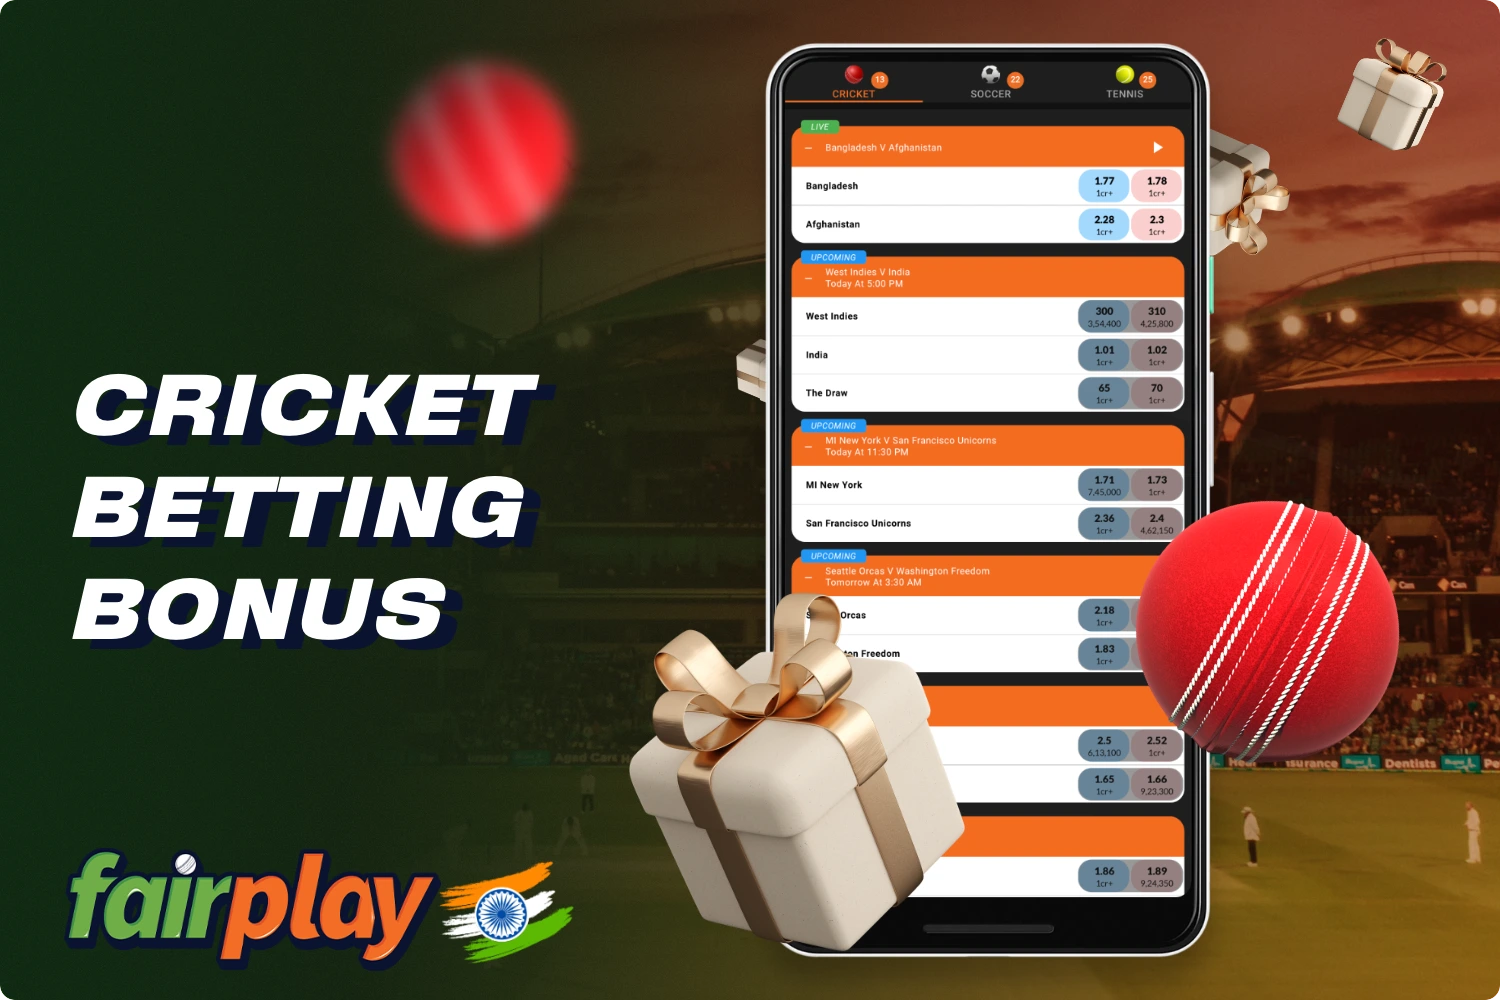 New Fairplay players can get a special bonus for online cricket betting